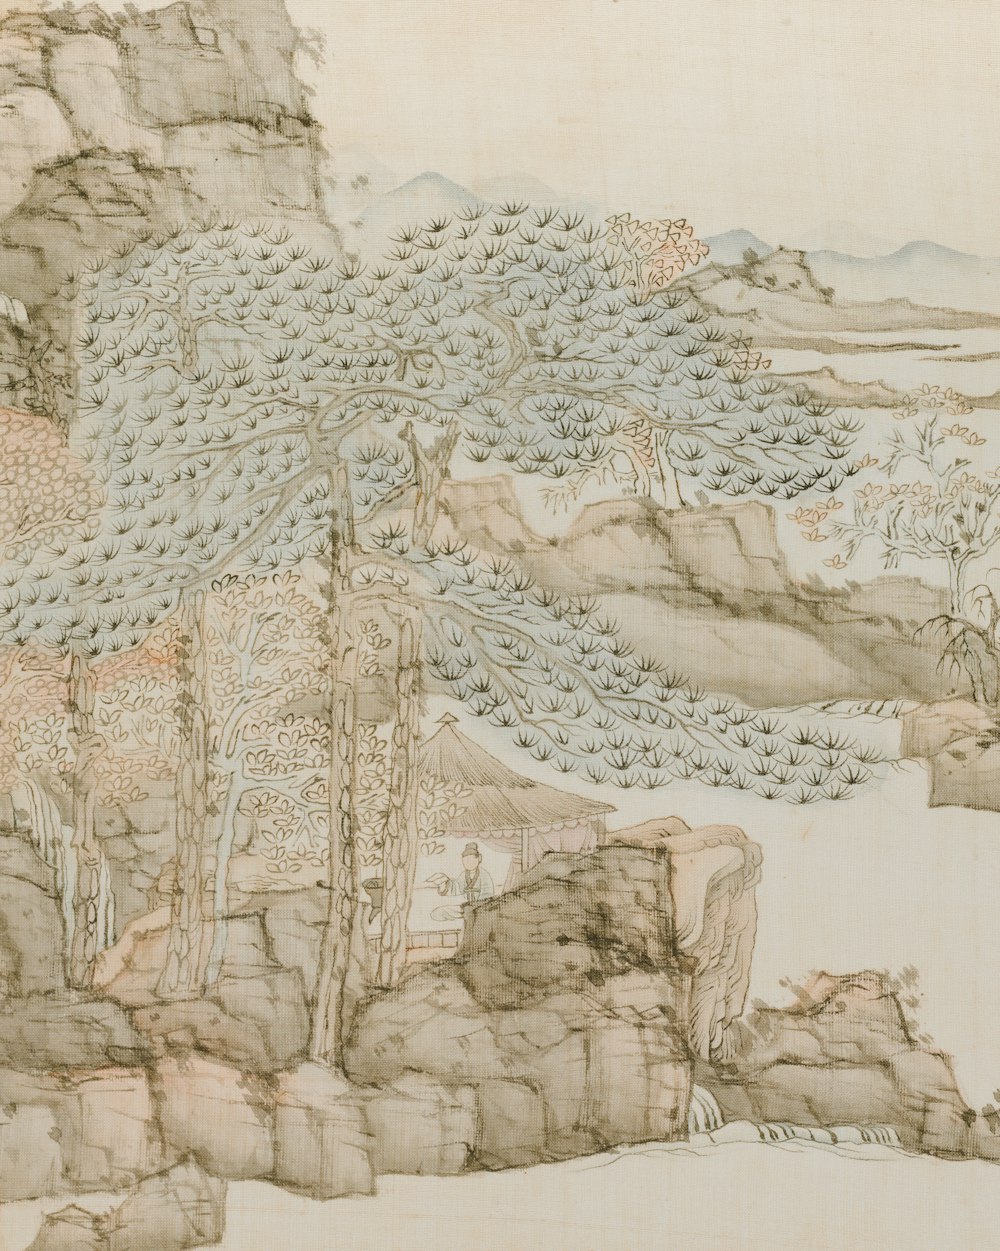 a painting of a mountain landscape with trees